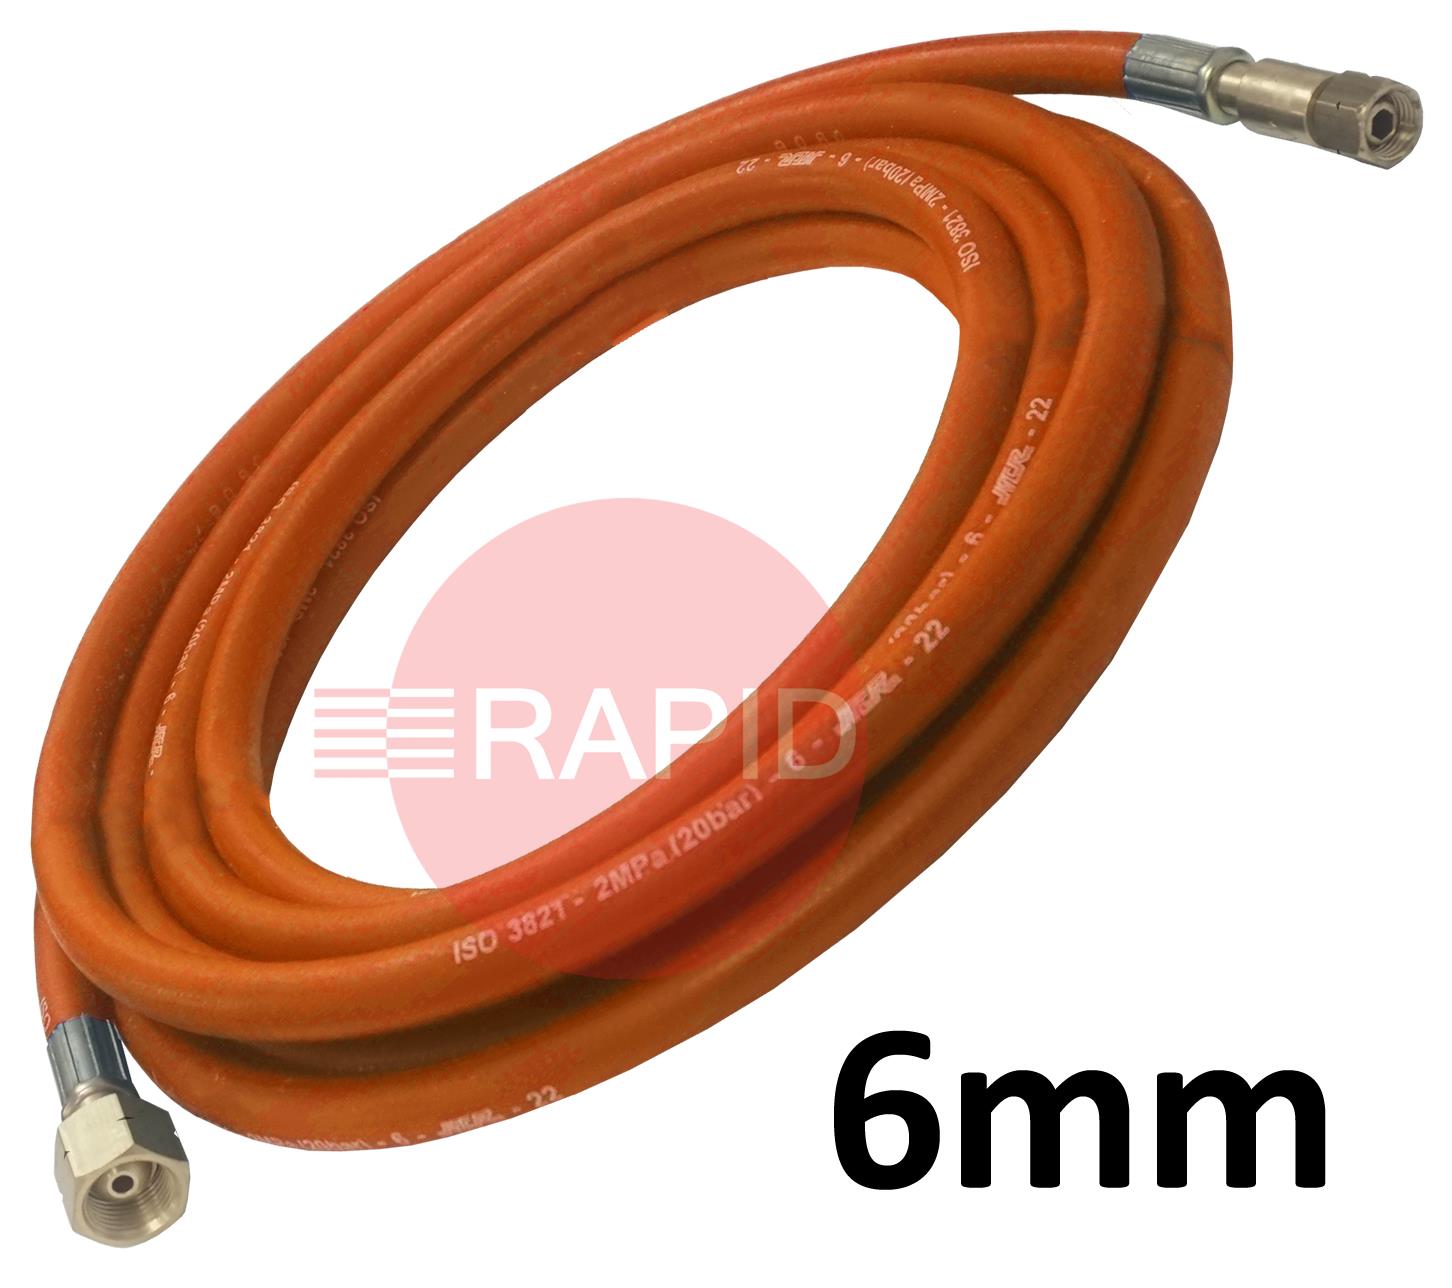 A5138  Fitted Propane Hose. 6mm Bore. G1/4 Check Valve & G3/8 Regulator Connection - 10m